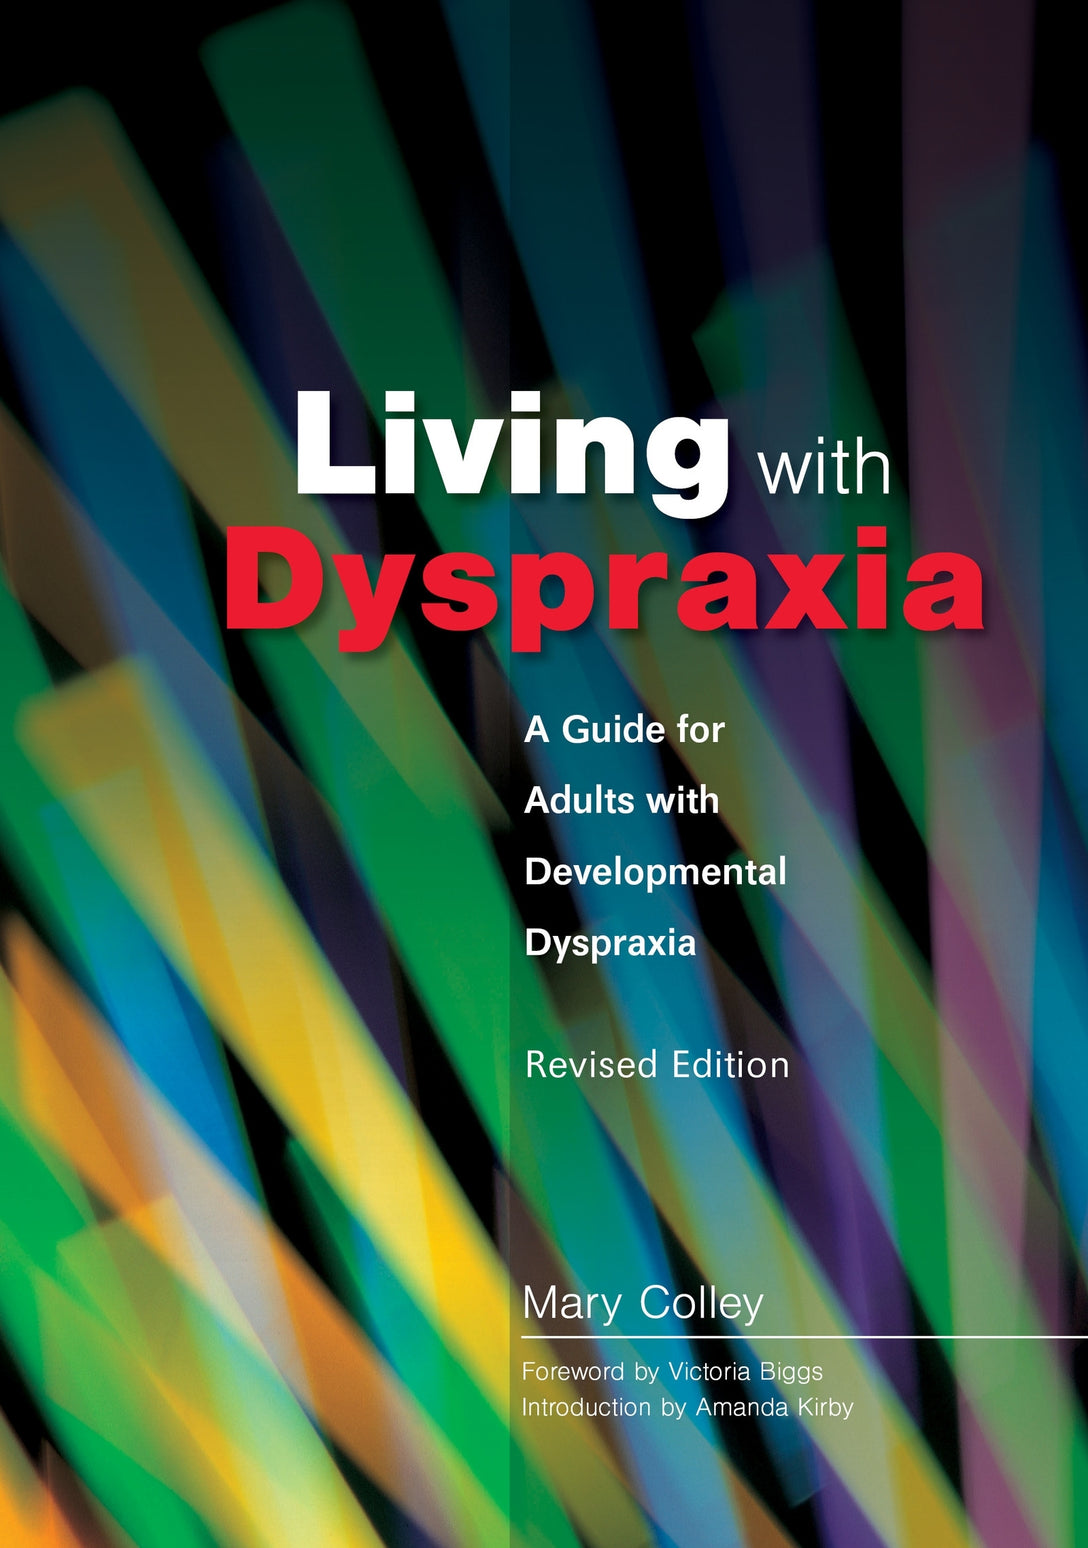 Living with Dyspraxia by Victoria Biggs, Mary Colley